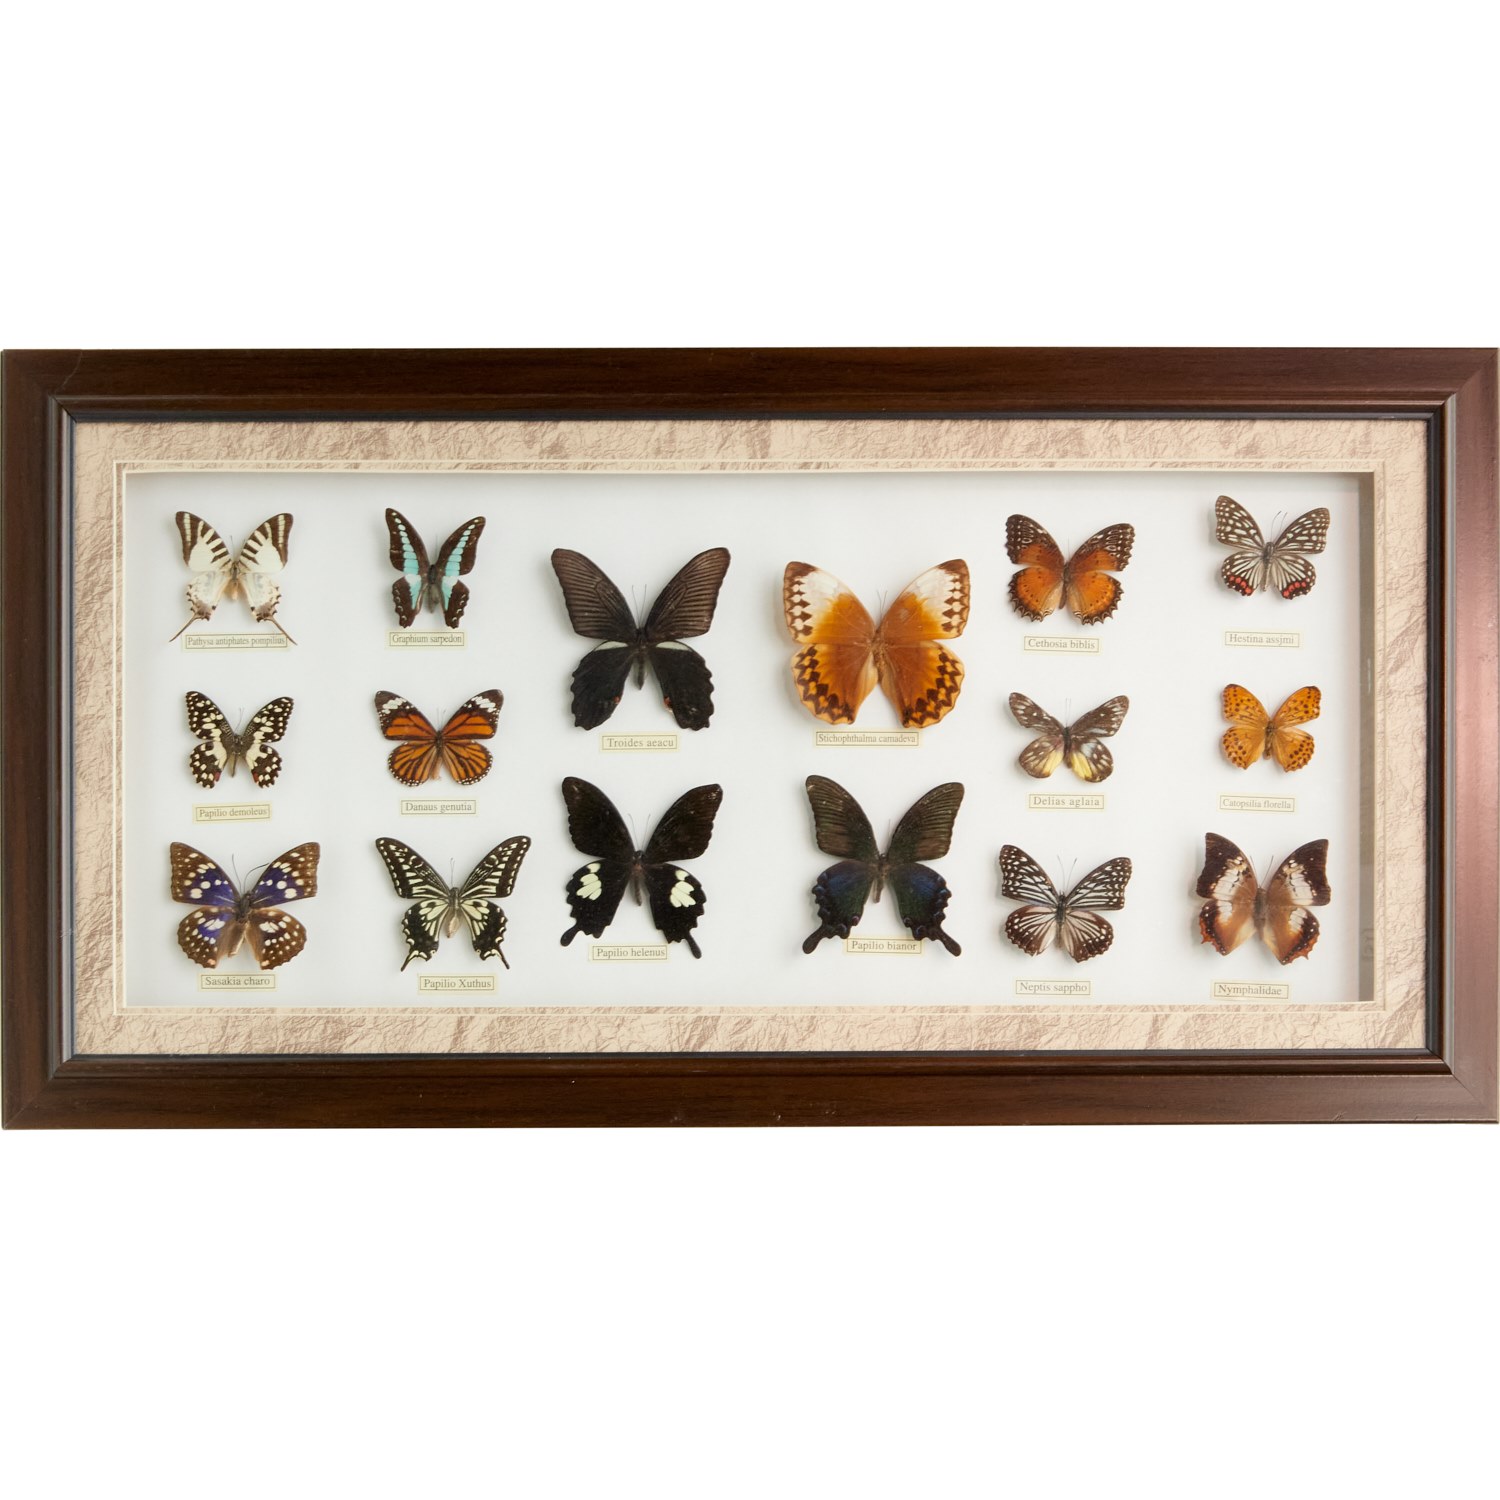 FRAMED COLLECTION OF BUTTERFLY 361d21